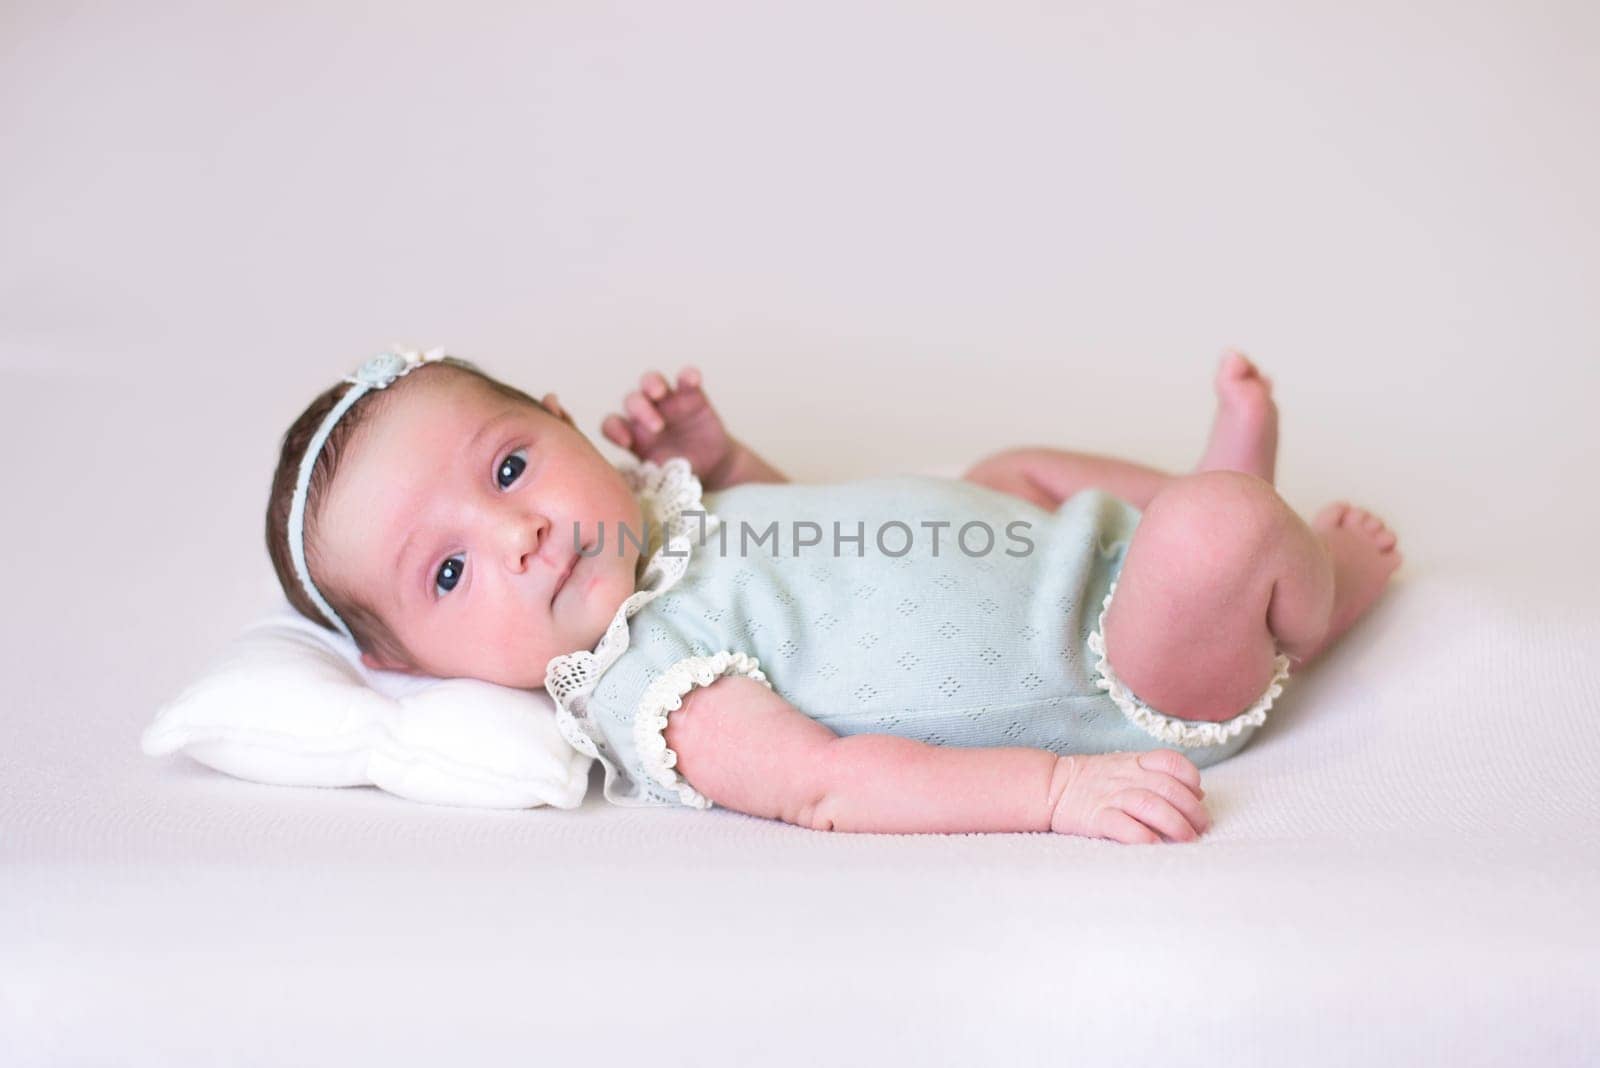 Tiny newborn girl in white cocoons on a white background. Professional studio photography by jcdiazhidalgo